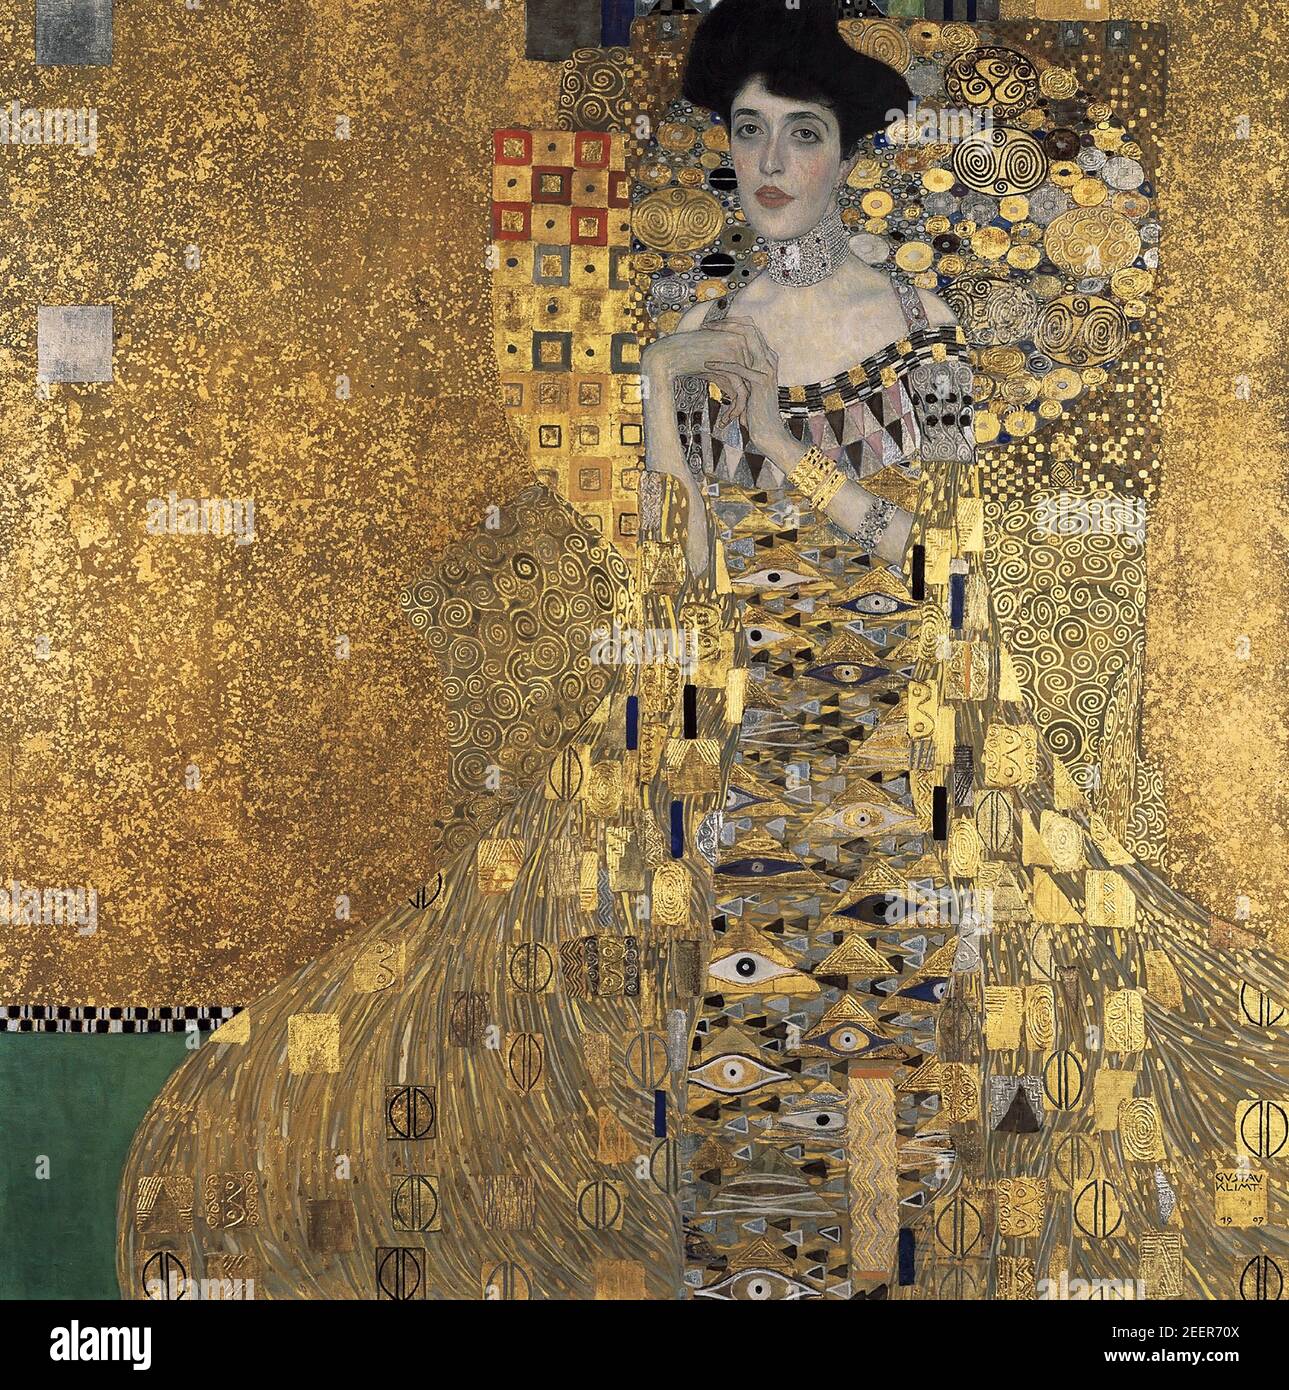 Gustav Klimt. Painting entitled 'Portrait of Adele Bloch-Bauer I (Adele Bloch-Bauer I)'  by Gustav Klimt (1862-1918), oil, silver and gold on canvas, 1907 Stock Photo